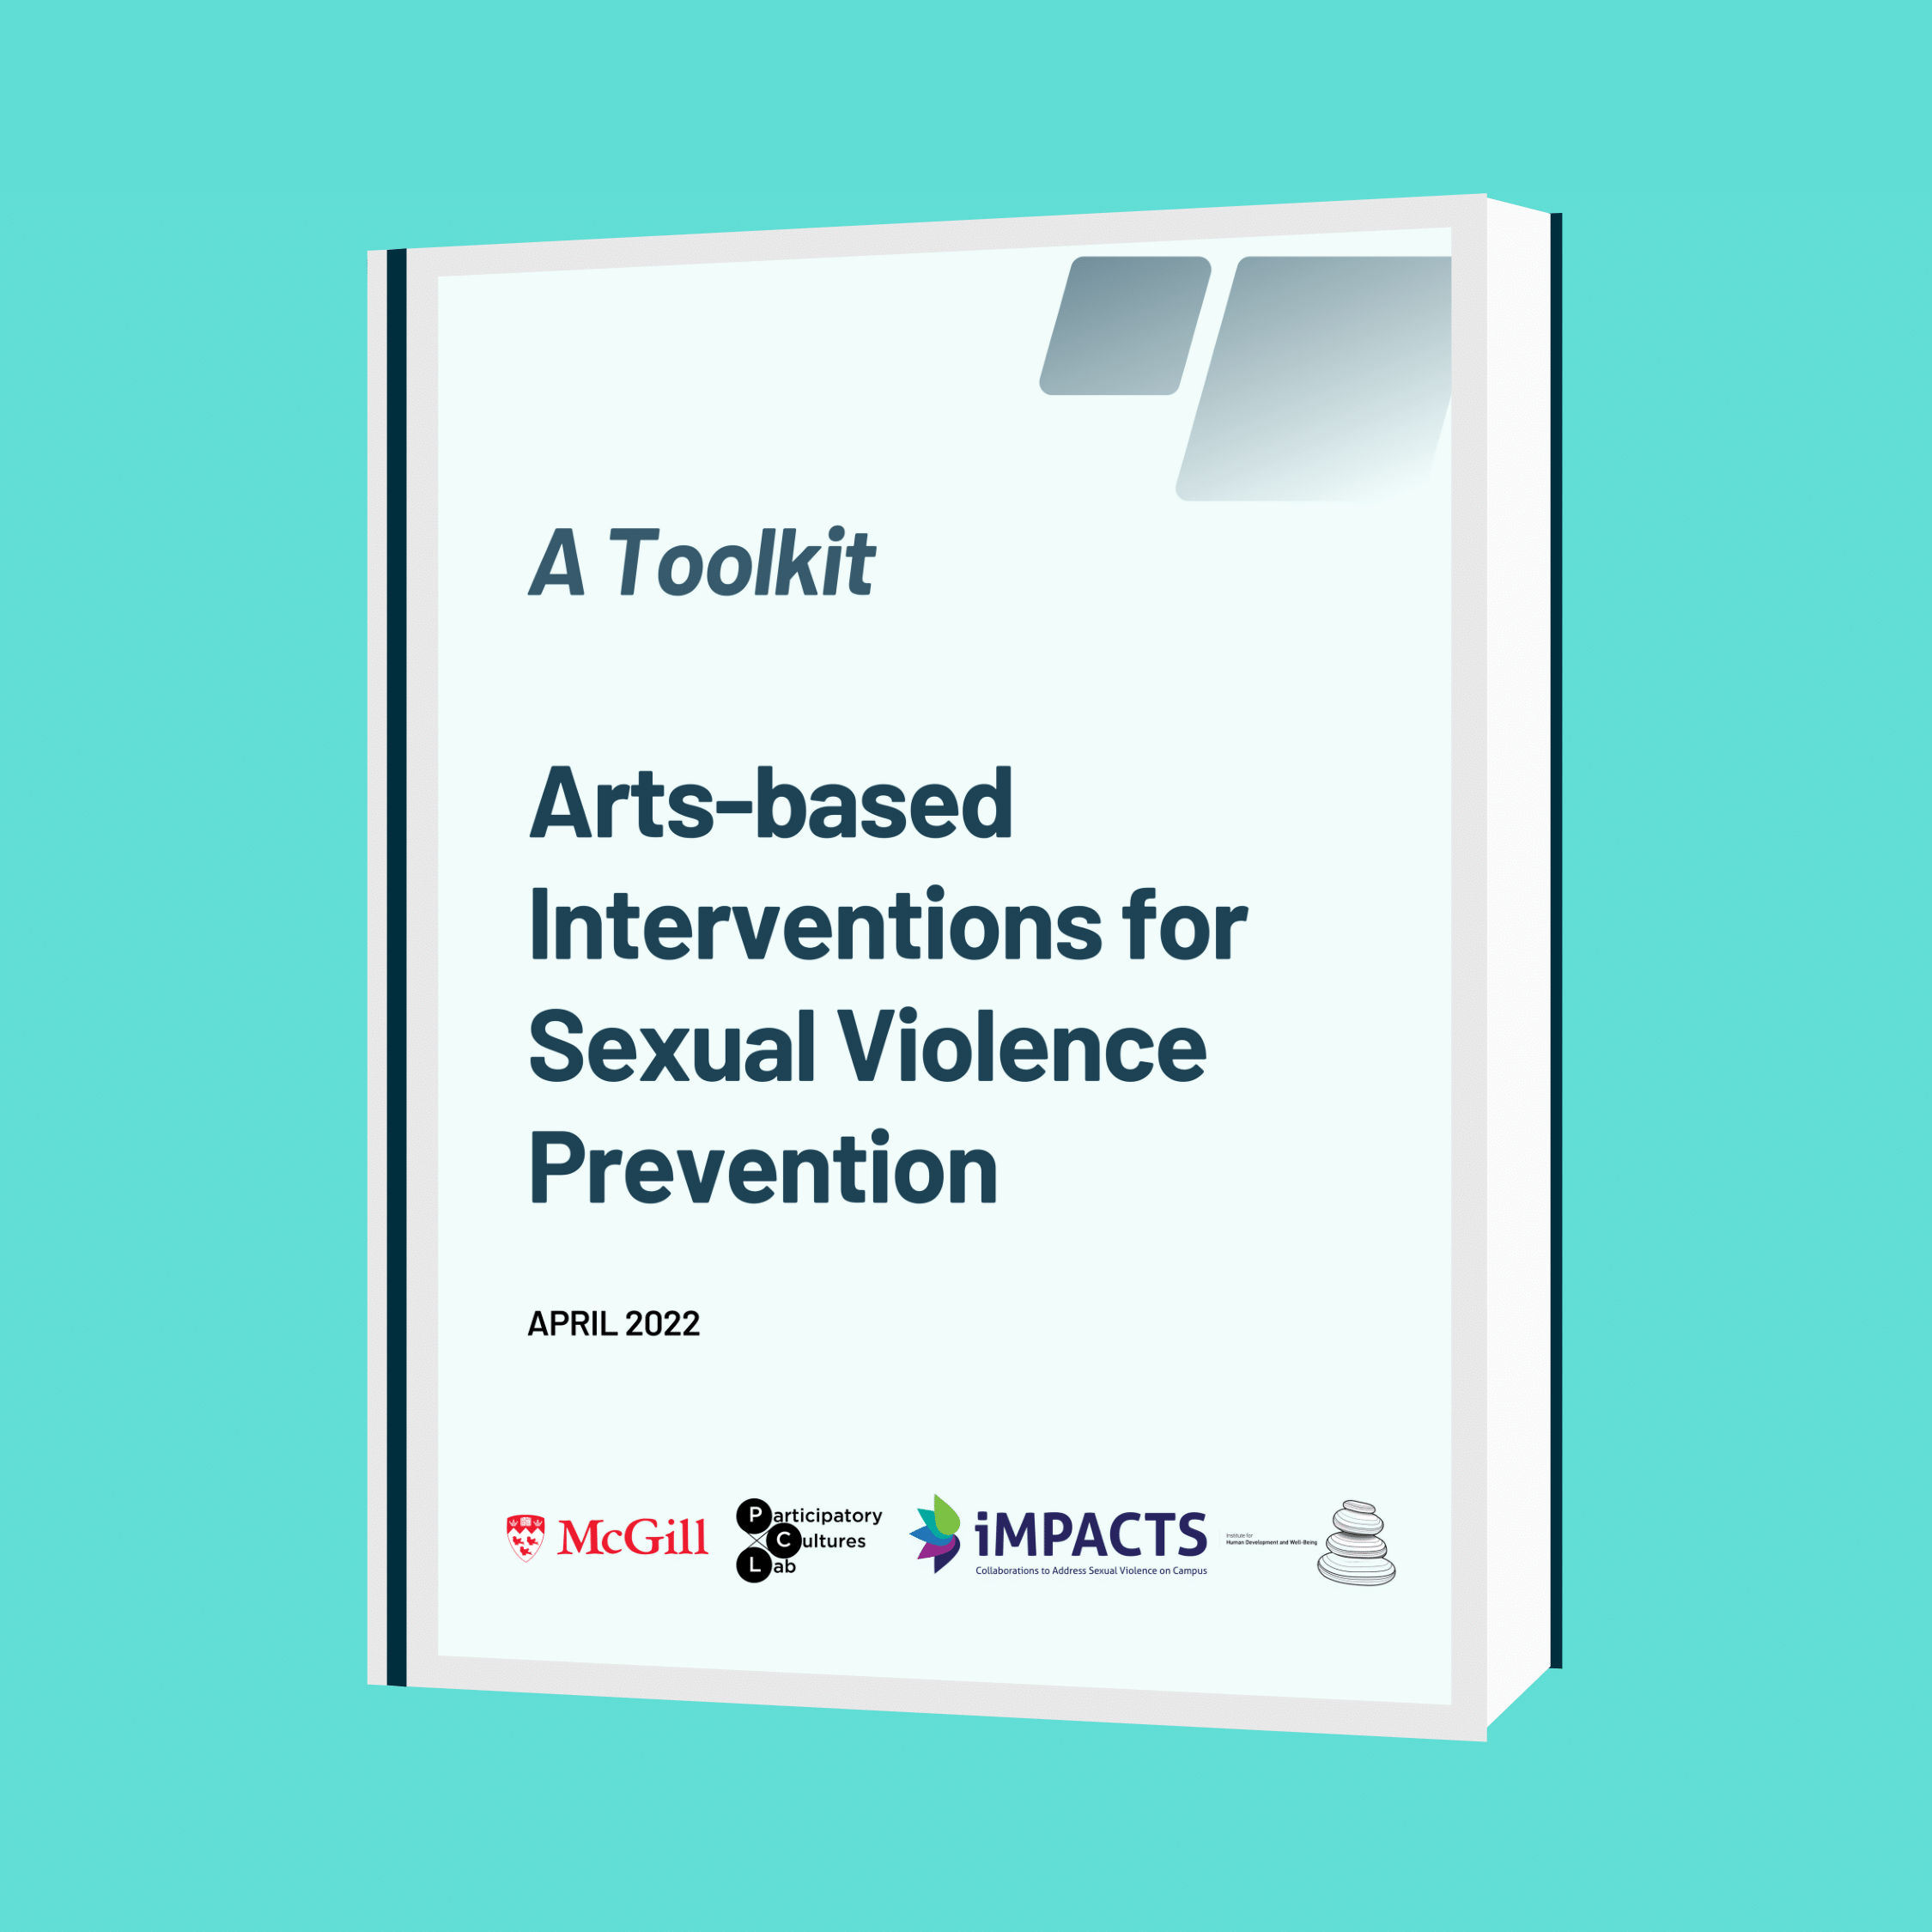  Arts-based interventions for sexual violence prevention